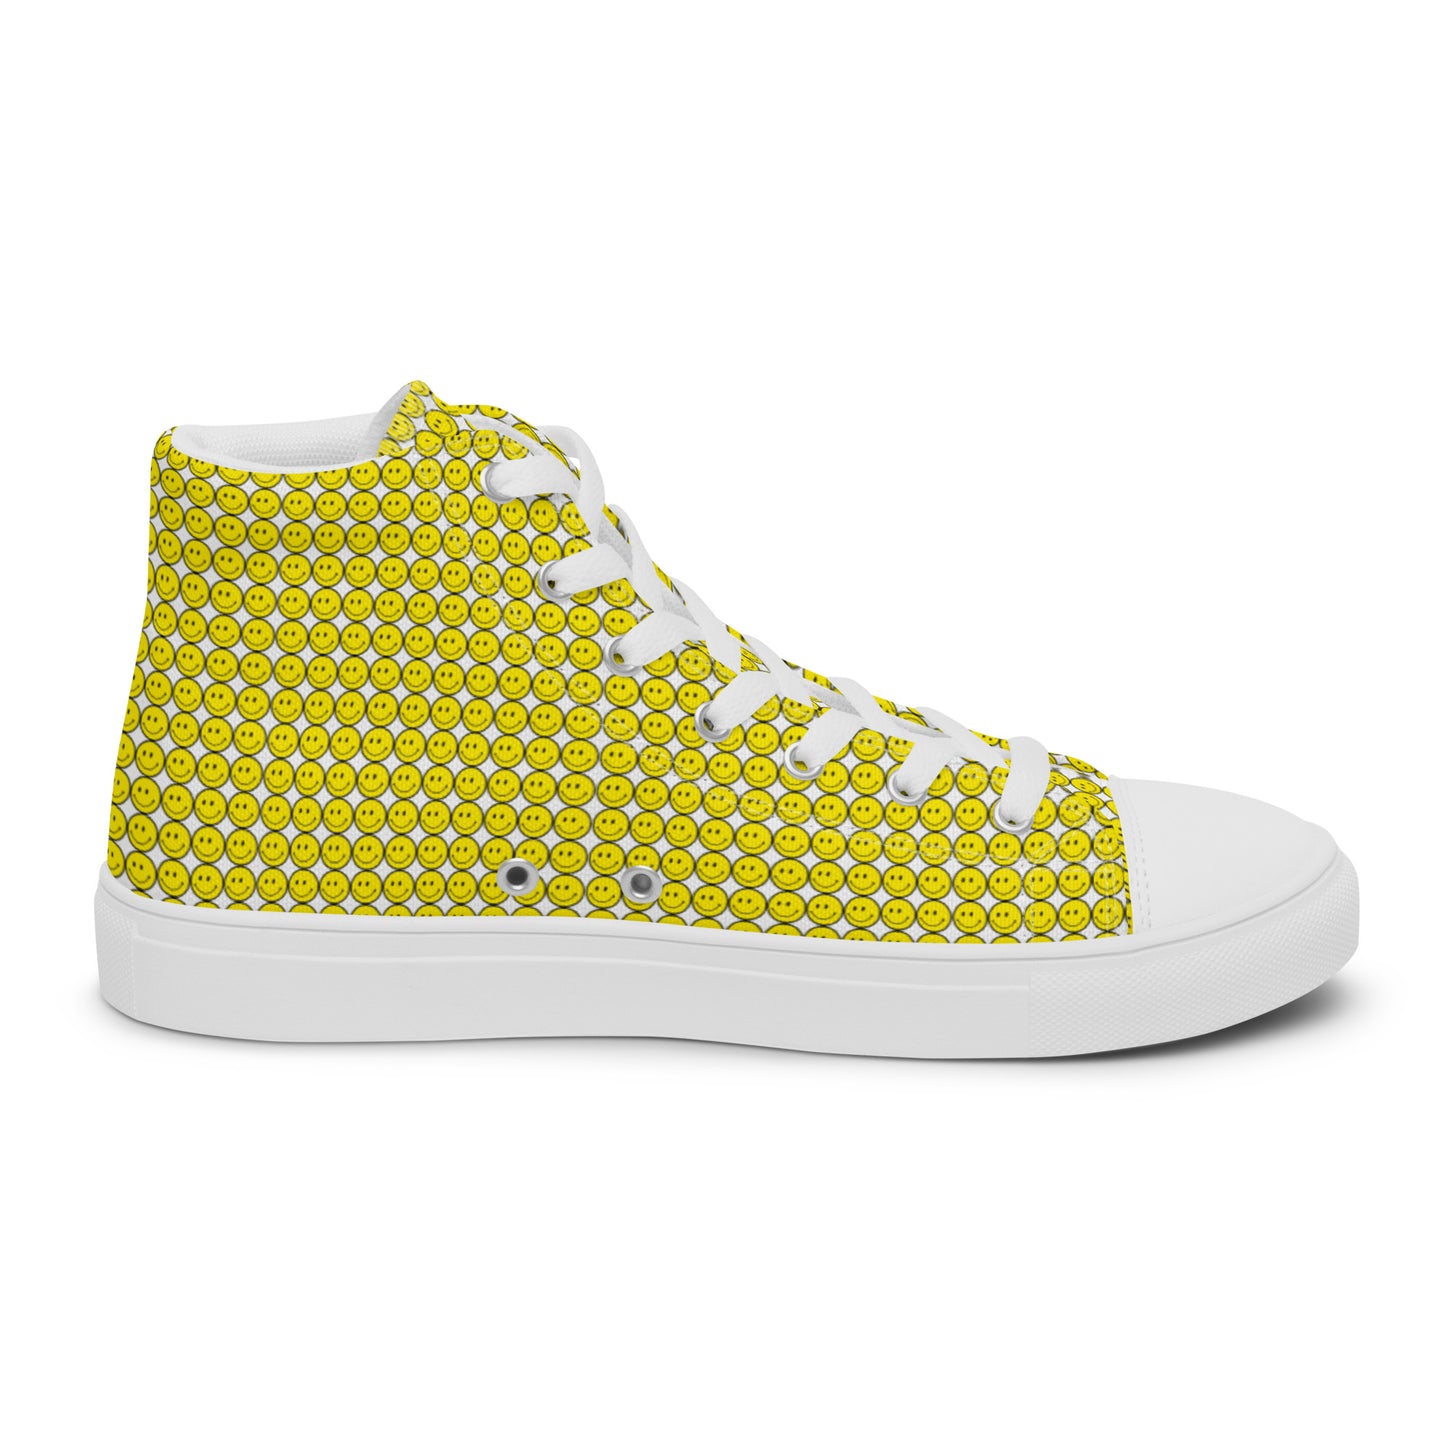 DEM SMILEYS by DOLVING - Women’s high top canvas shoes